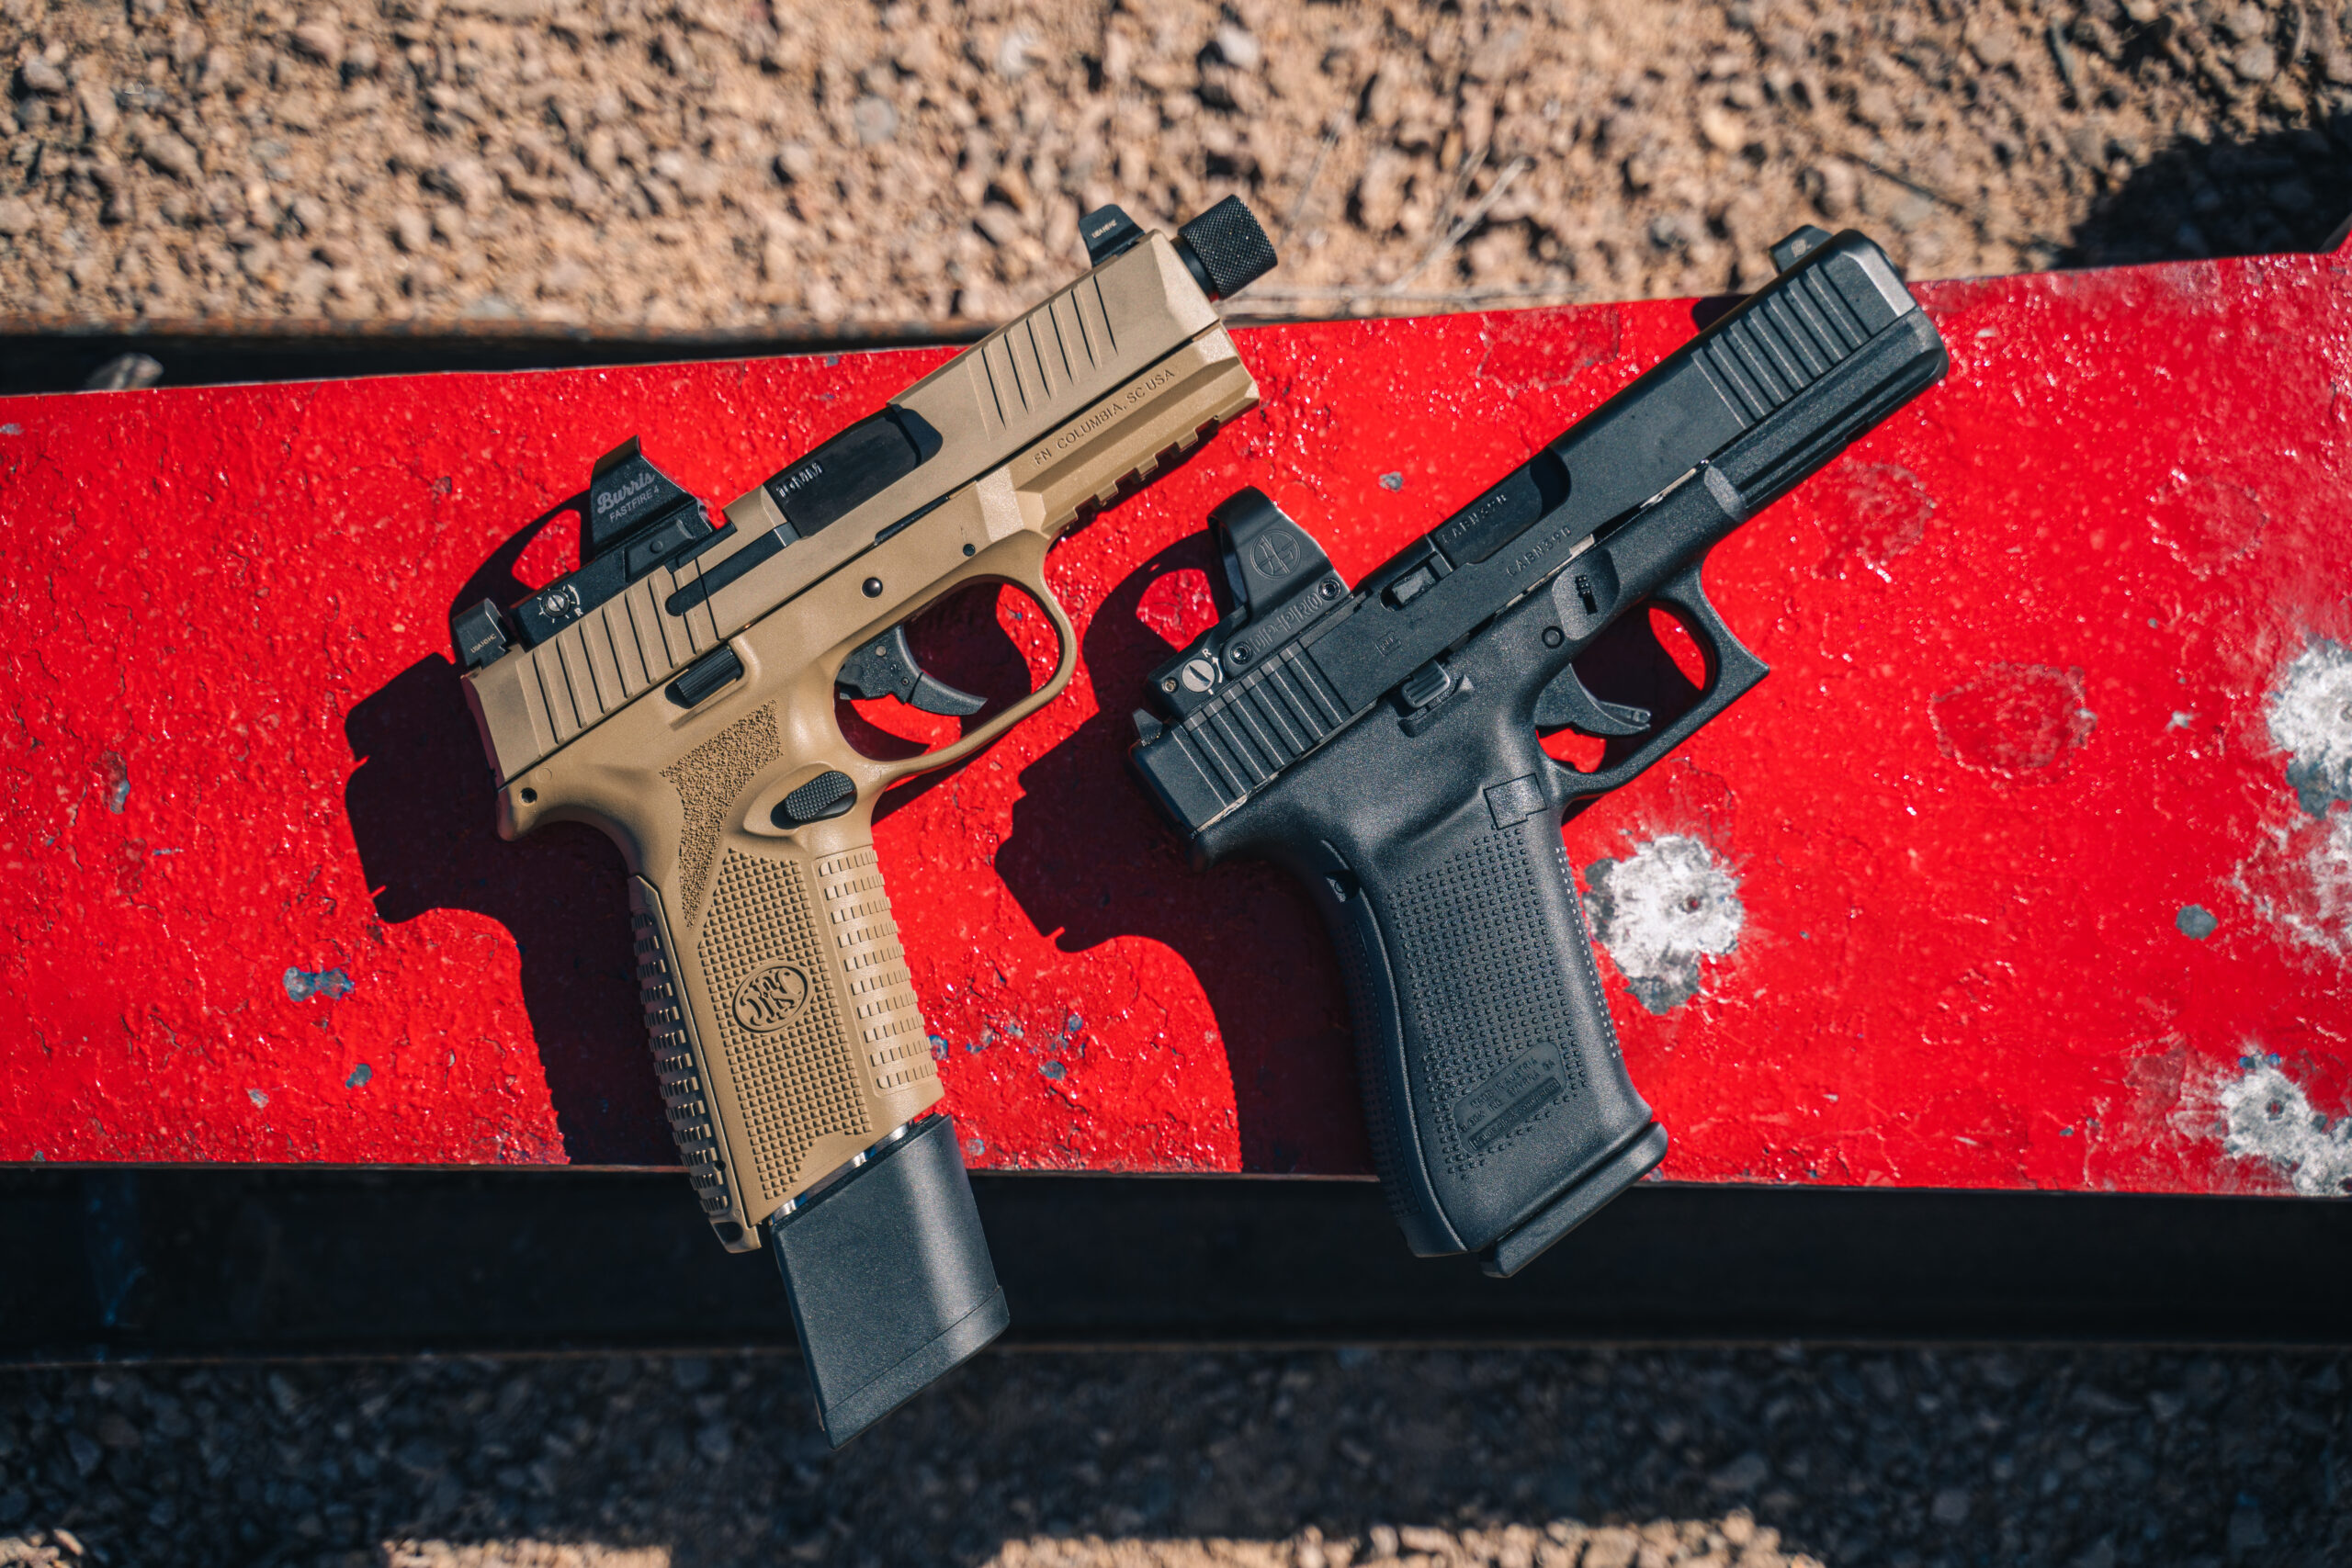 FN 510 and G20 Gen 5